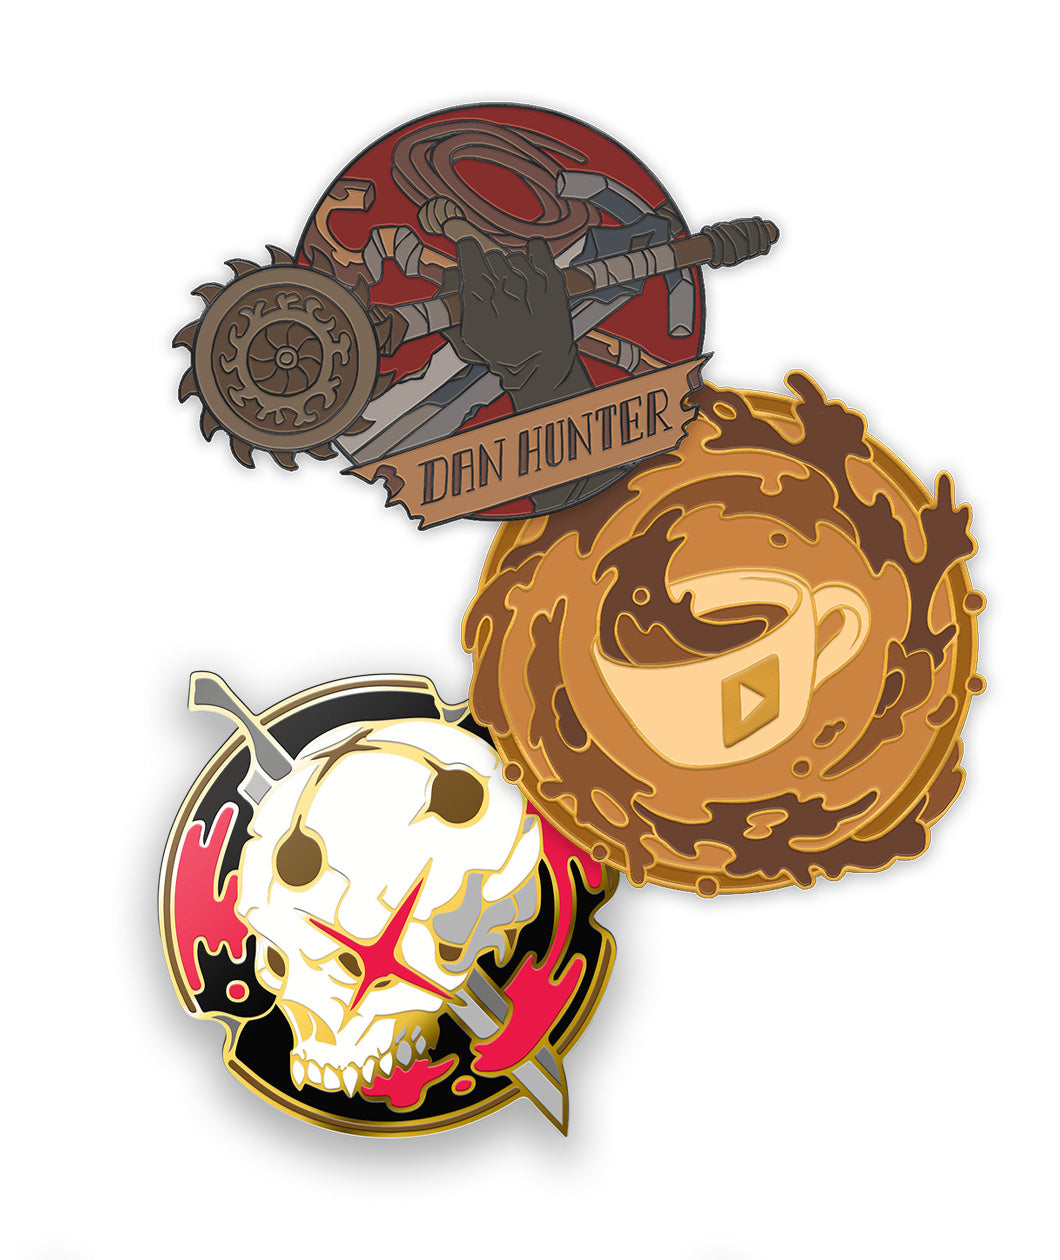 A bundle of all three pins from Playframe. 